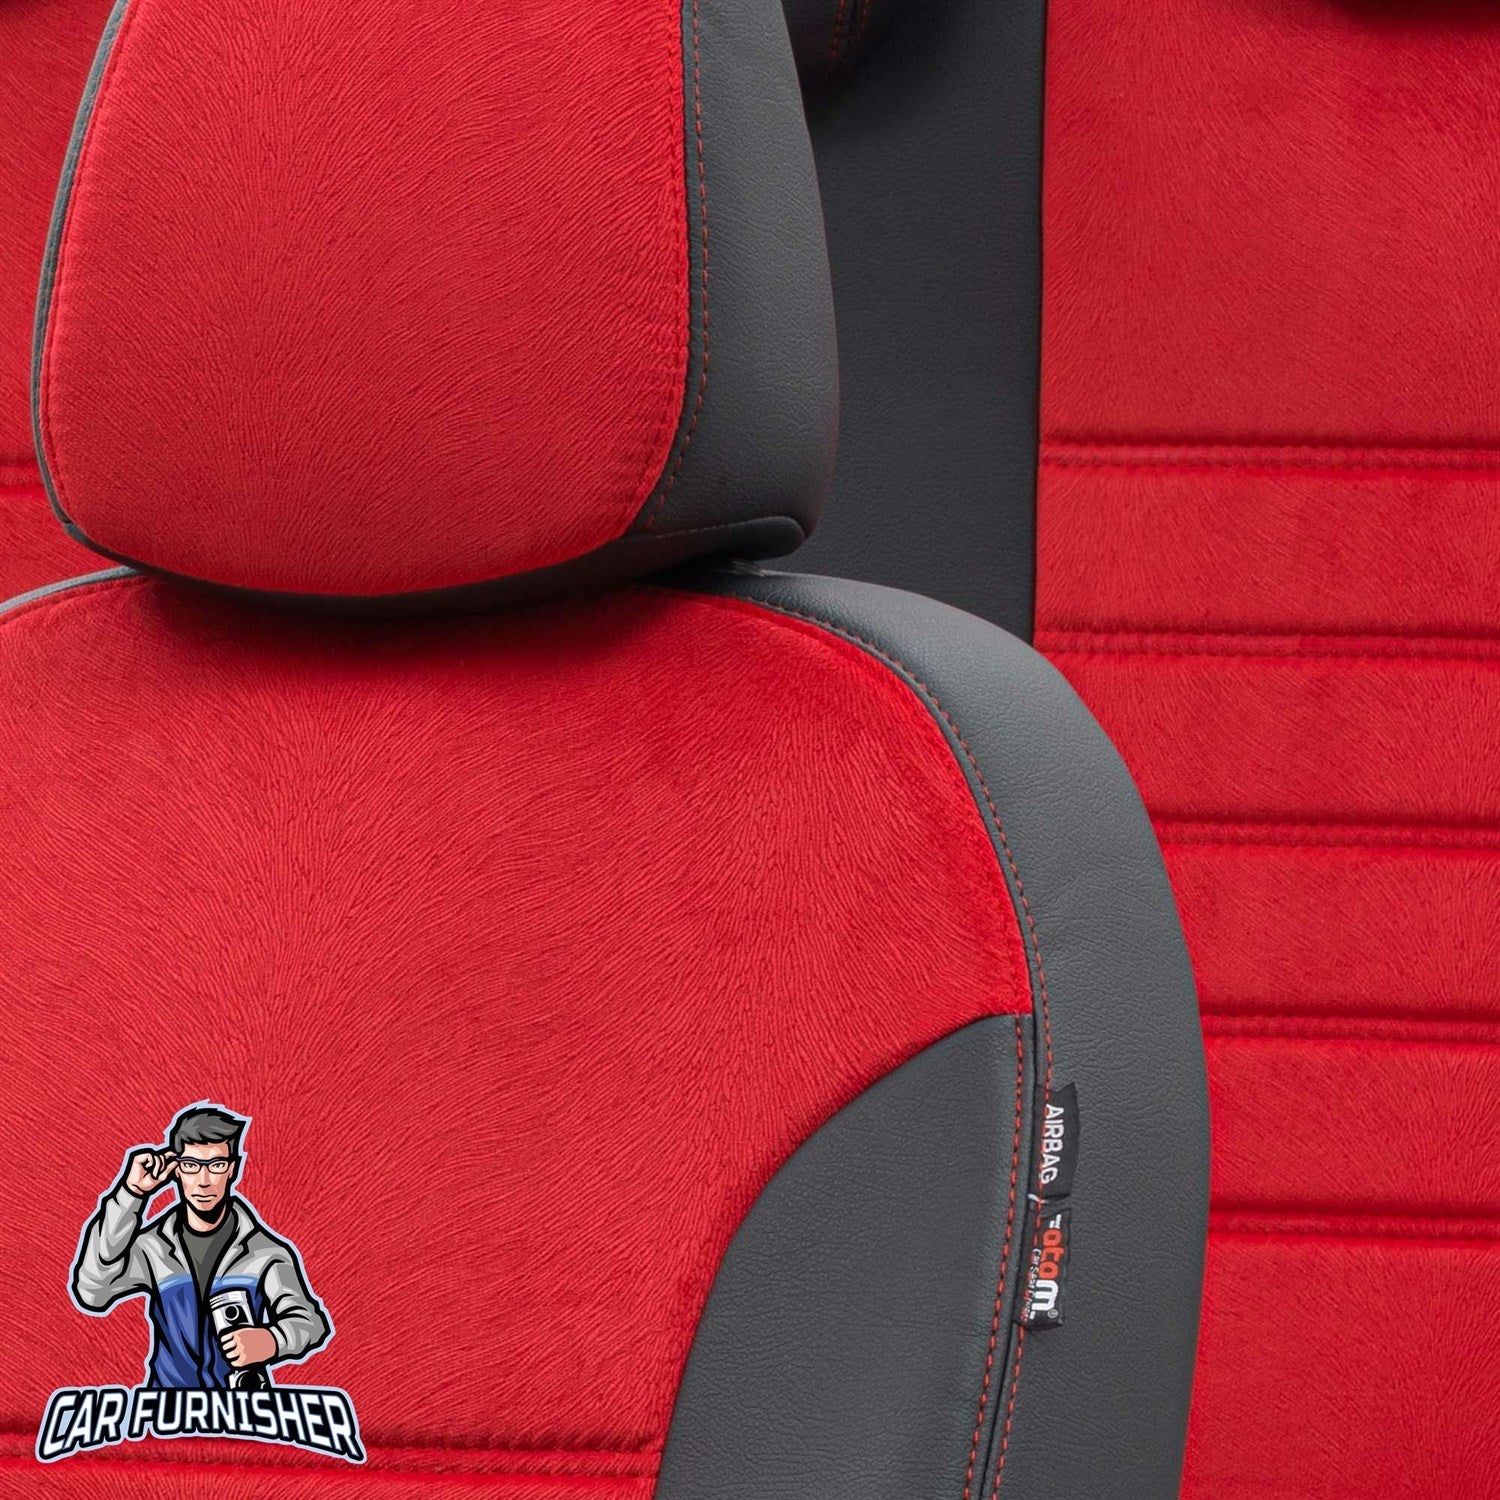 Volvo S80 Car Seat Cover 2006-2016 D3/D4/D5/T6 London Design Red Full Set (5 Seats + Handrest) Leather & Fabric